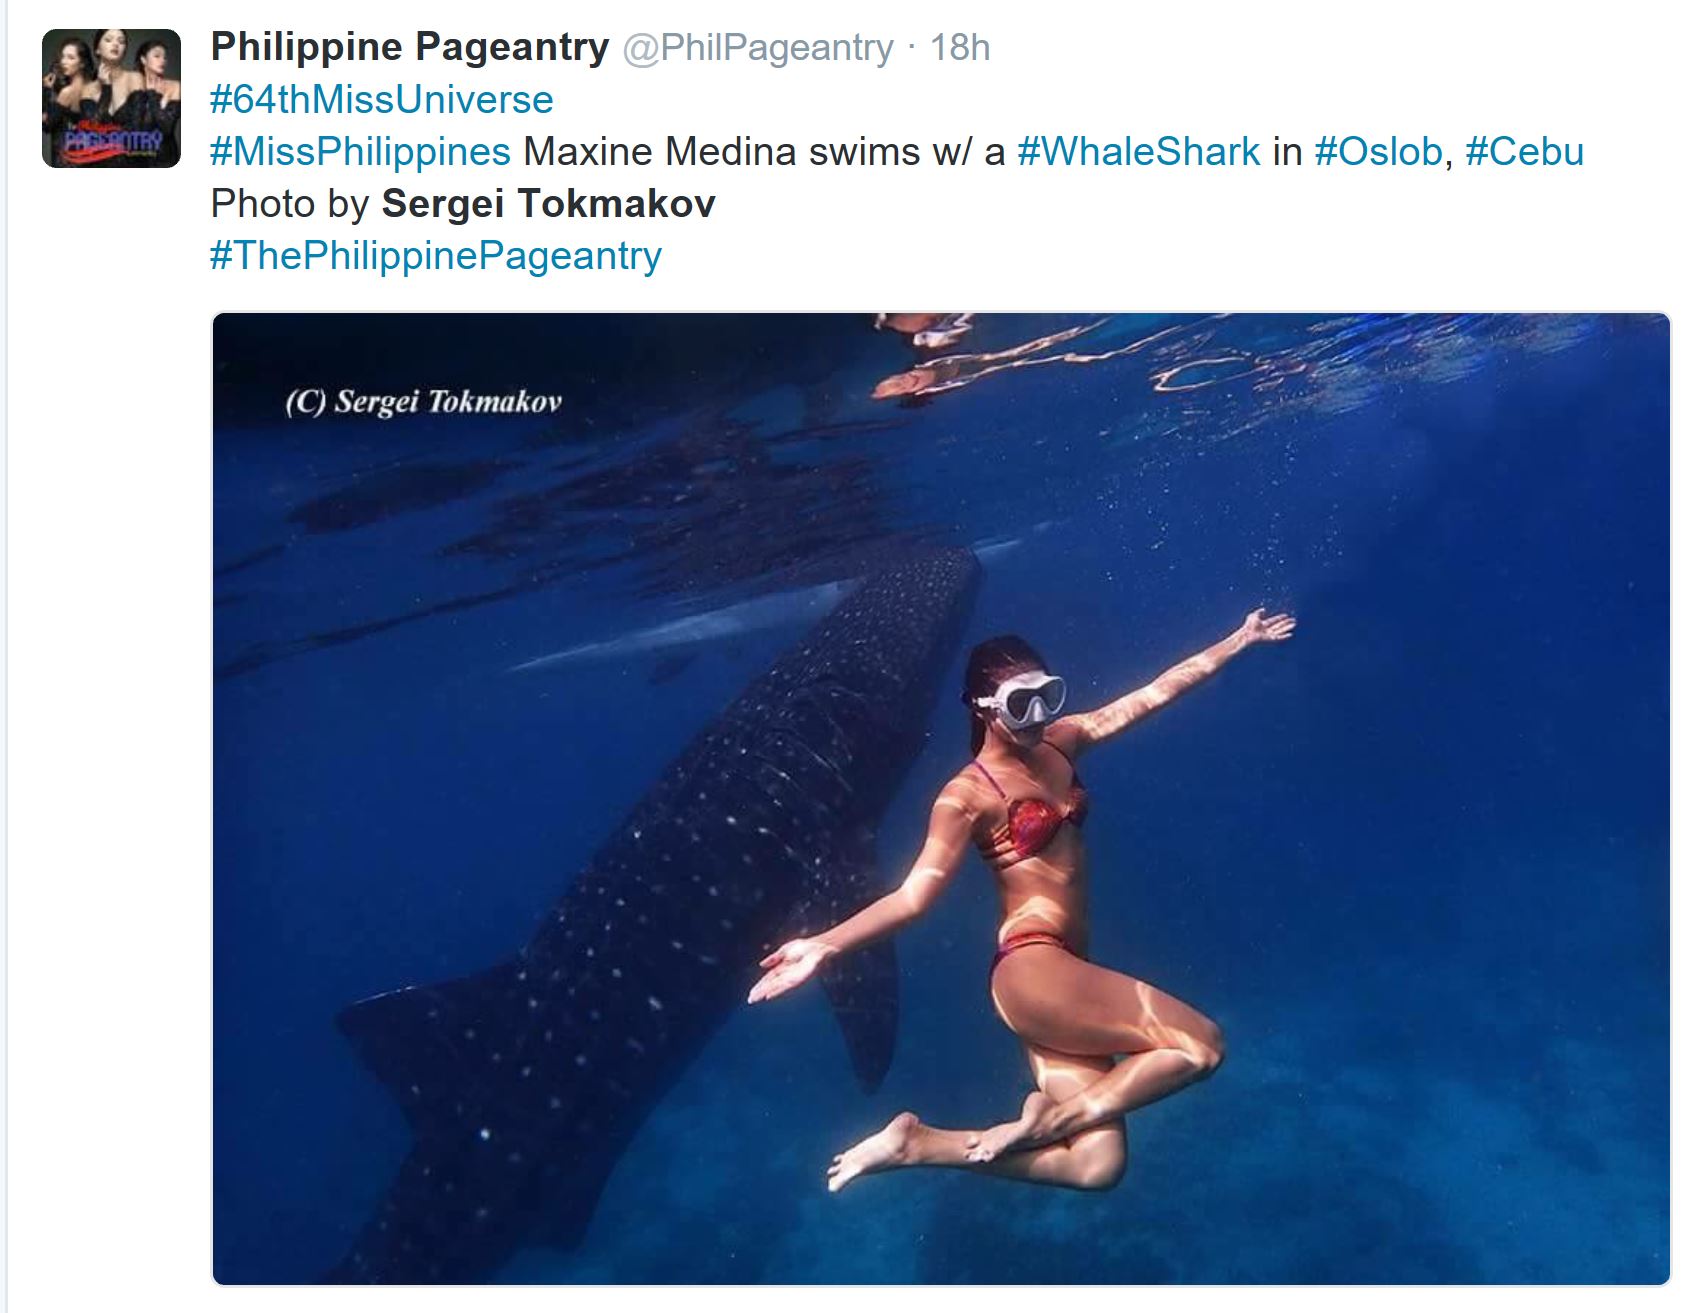 Philippines' bet Maxine Medina is photographed here by Sergei Tokmakov swimming among whale sharks in Oslob, Cebu. (Photo courtesy Sergei Tokmakov)